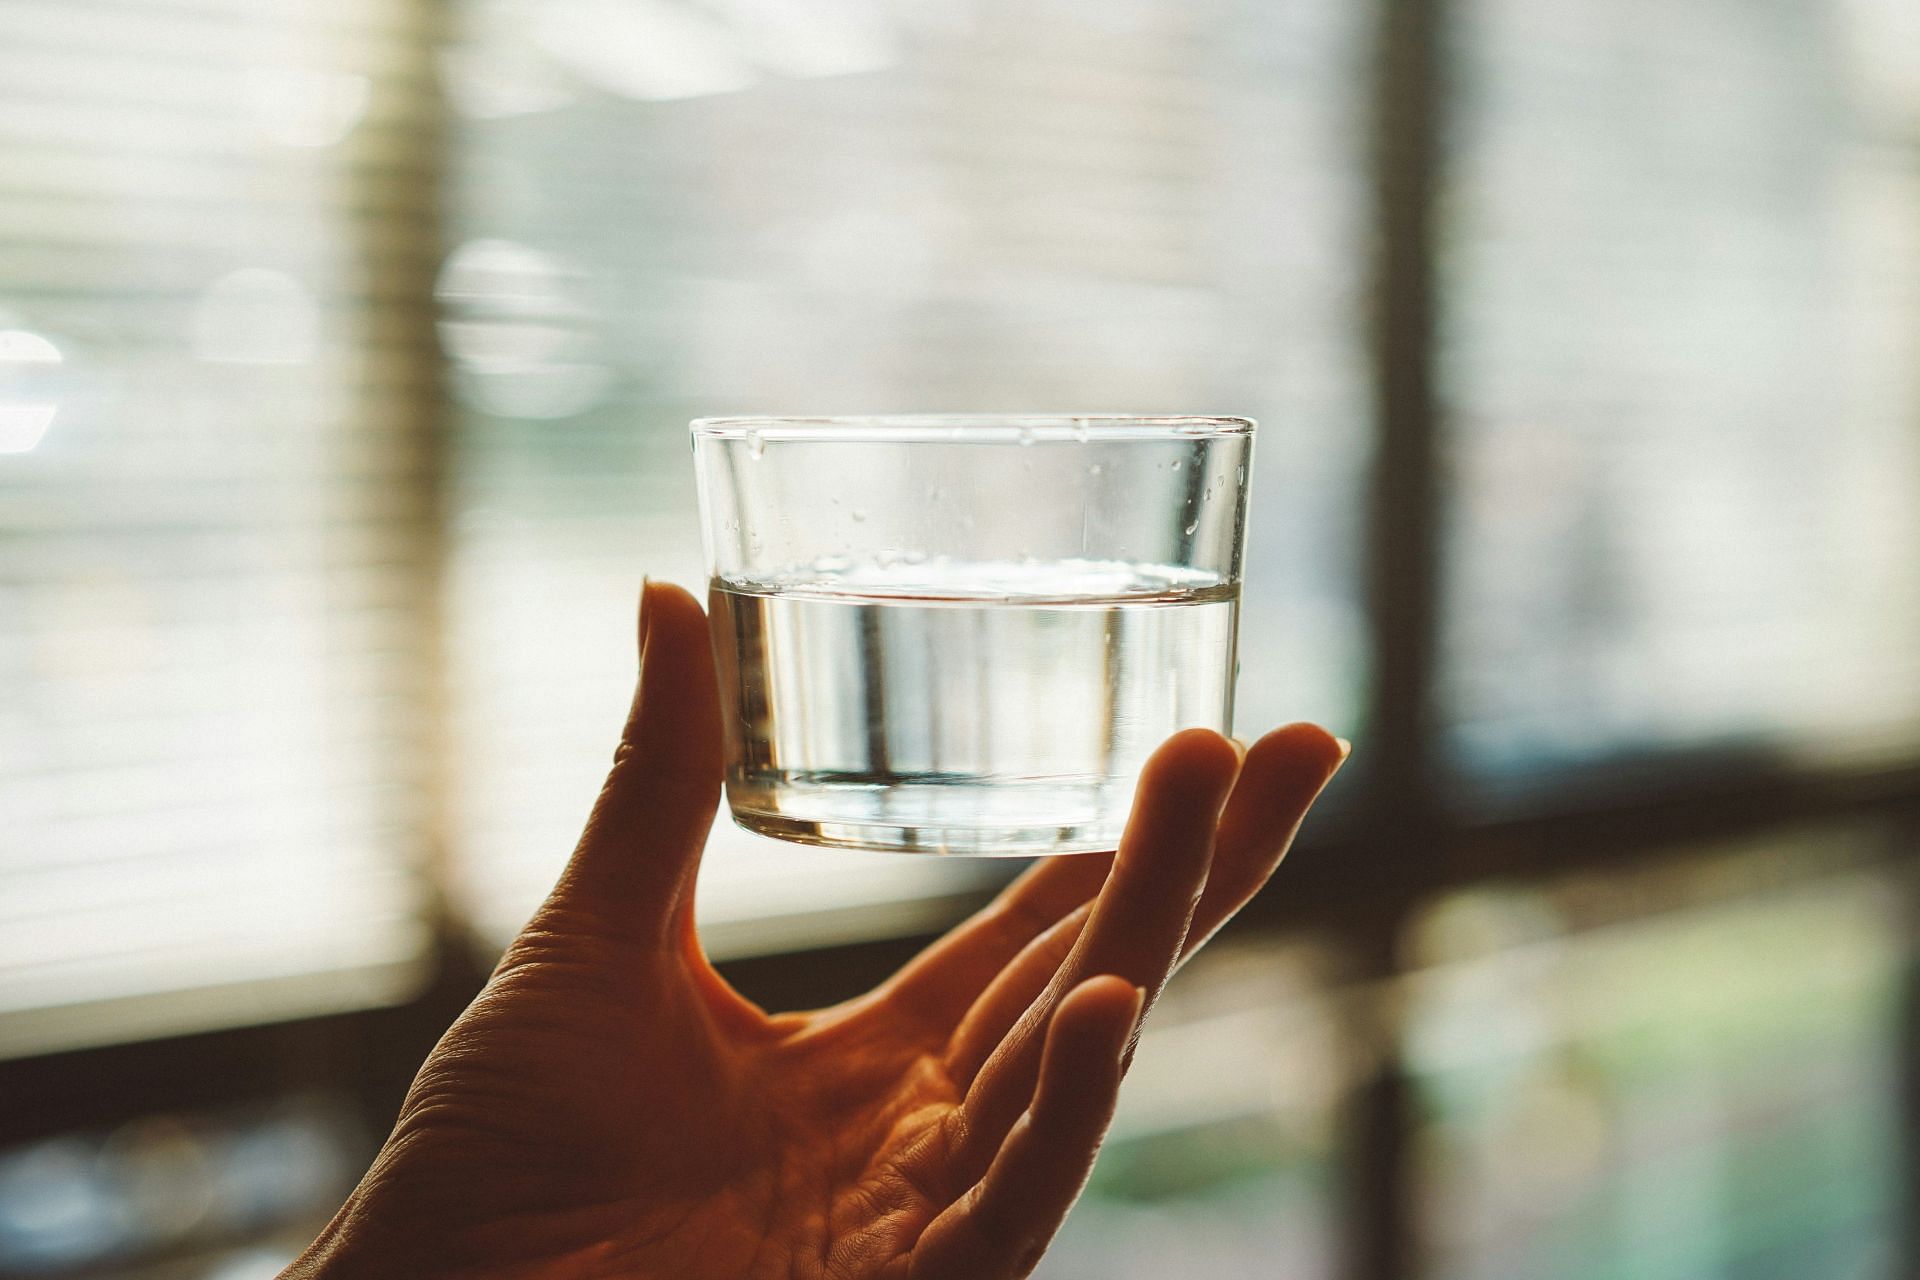 Drink lots of water to prevent painful bowel movements. (Image by Manki Kim/Unsplash)